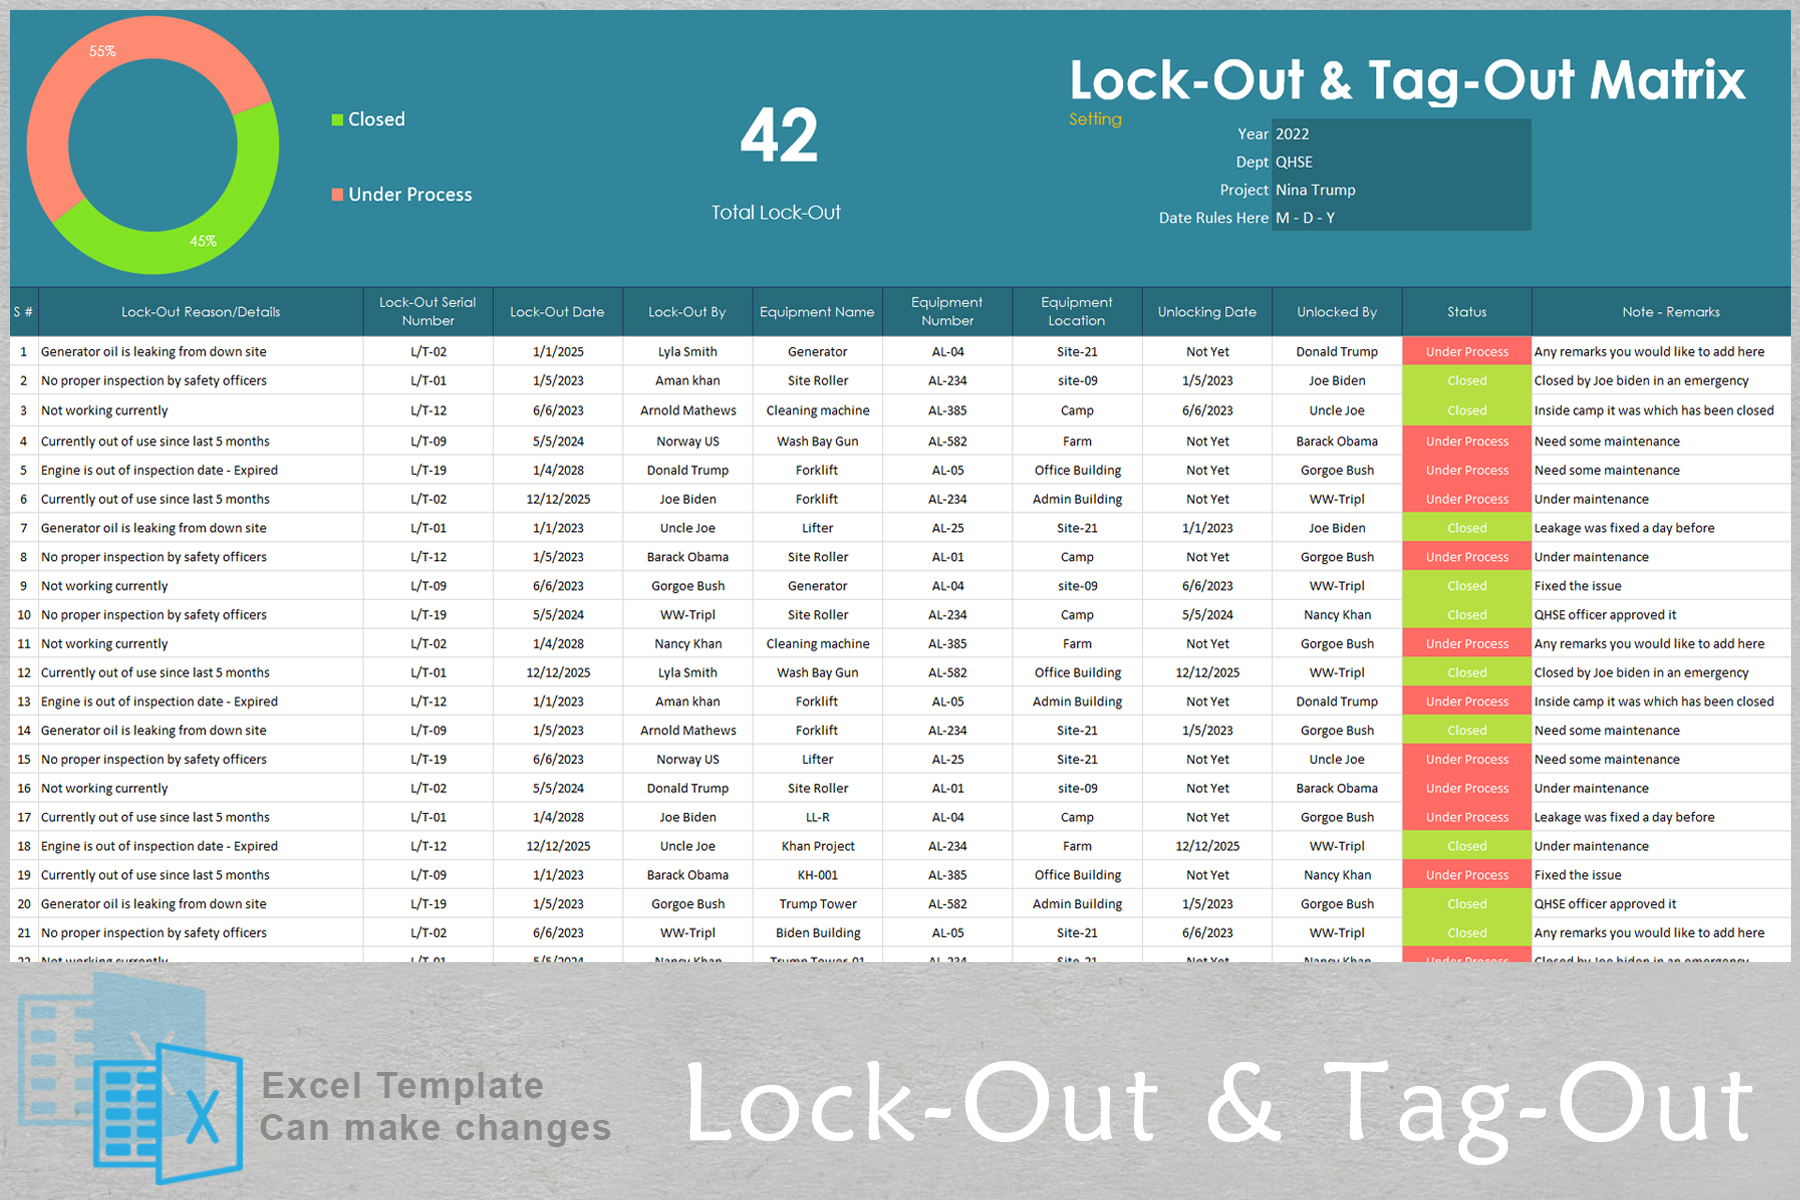 Log-out & Tag-out Tracking Matrix Template